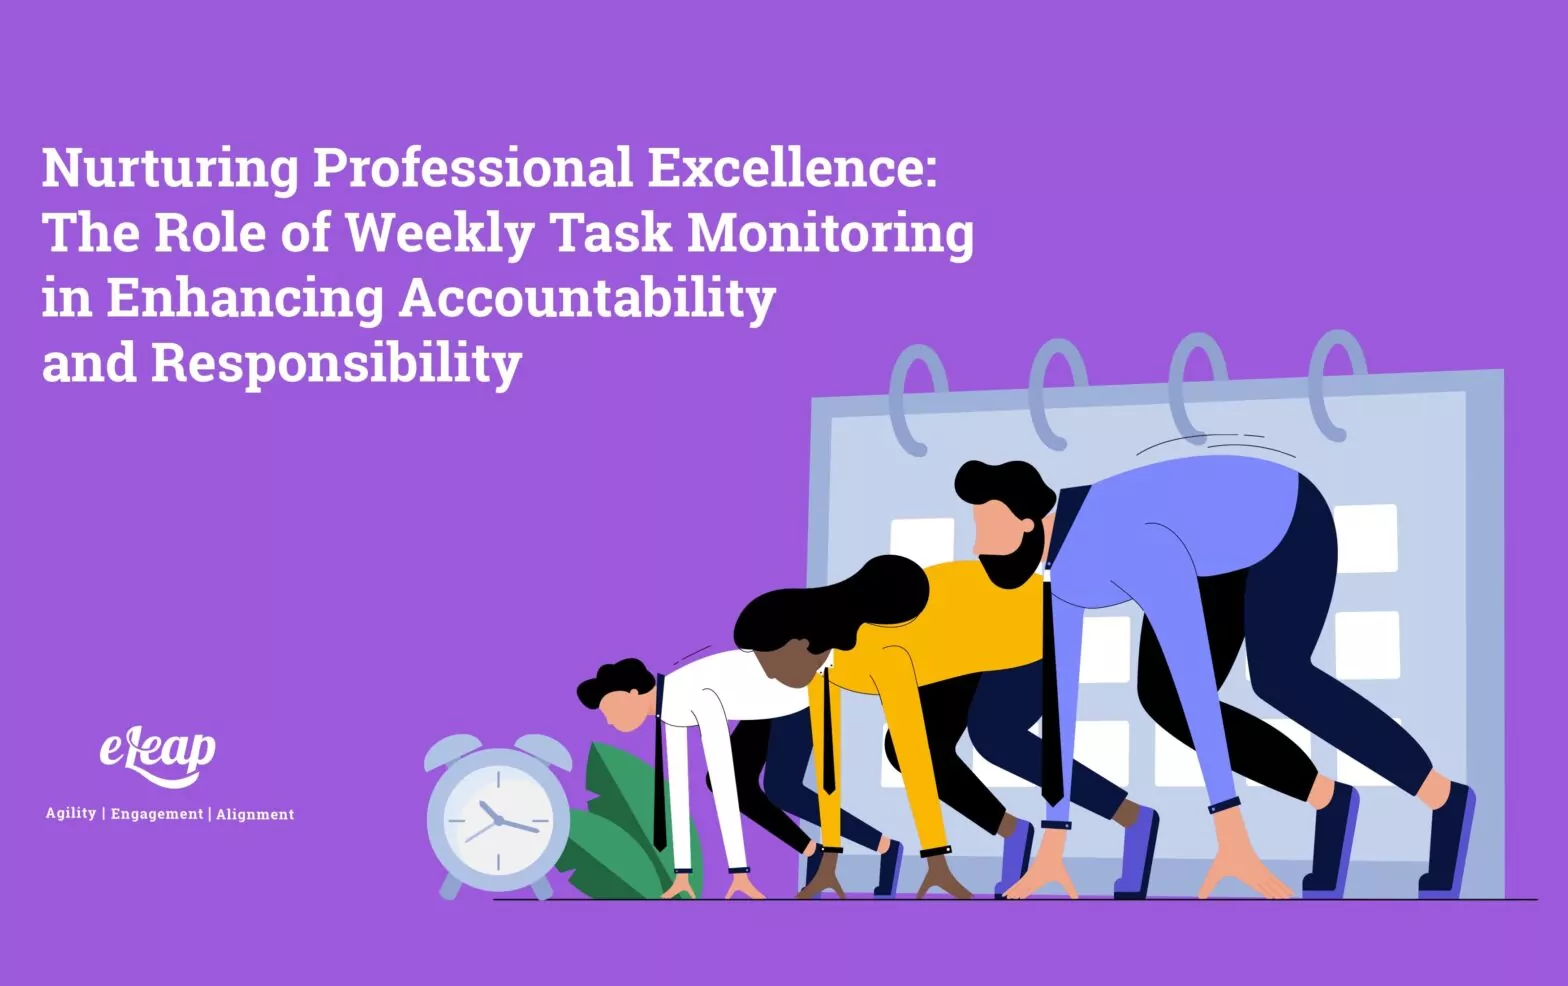 Nurturing Professional Excellence: The Role of Weekly Task Monitoring in Enhancing Accountability and Responsibility